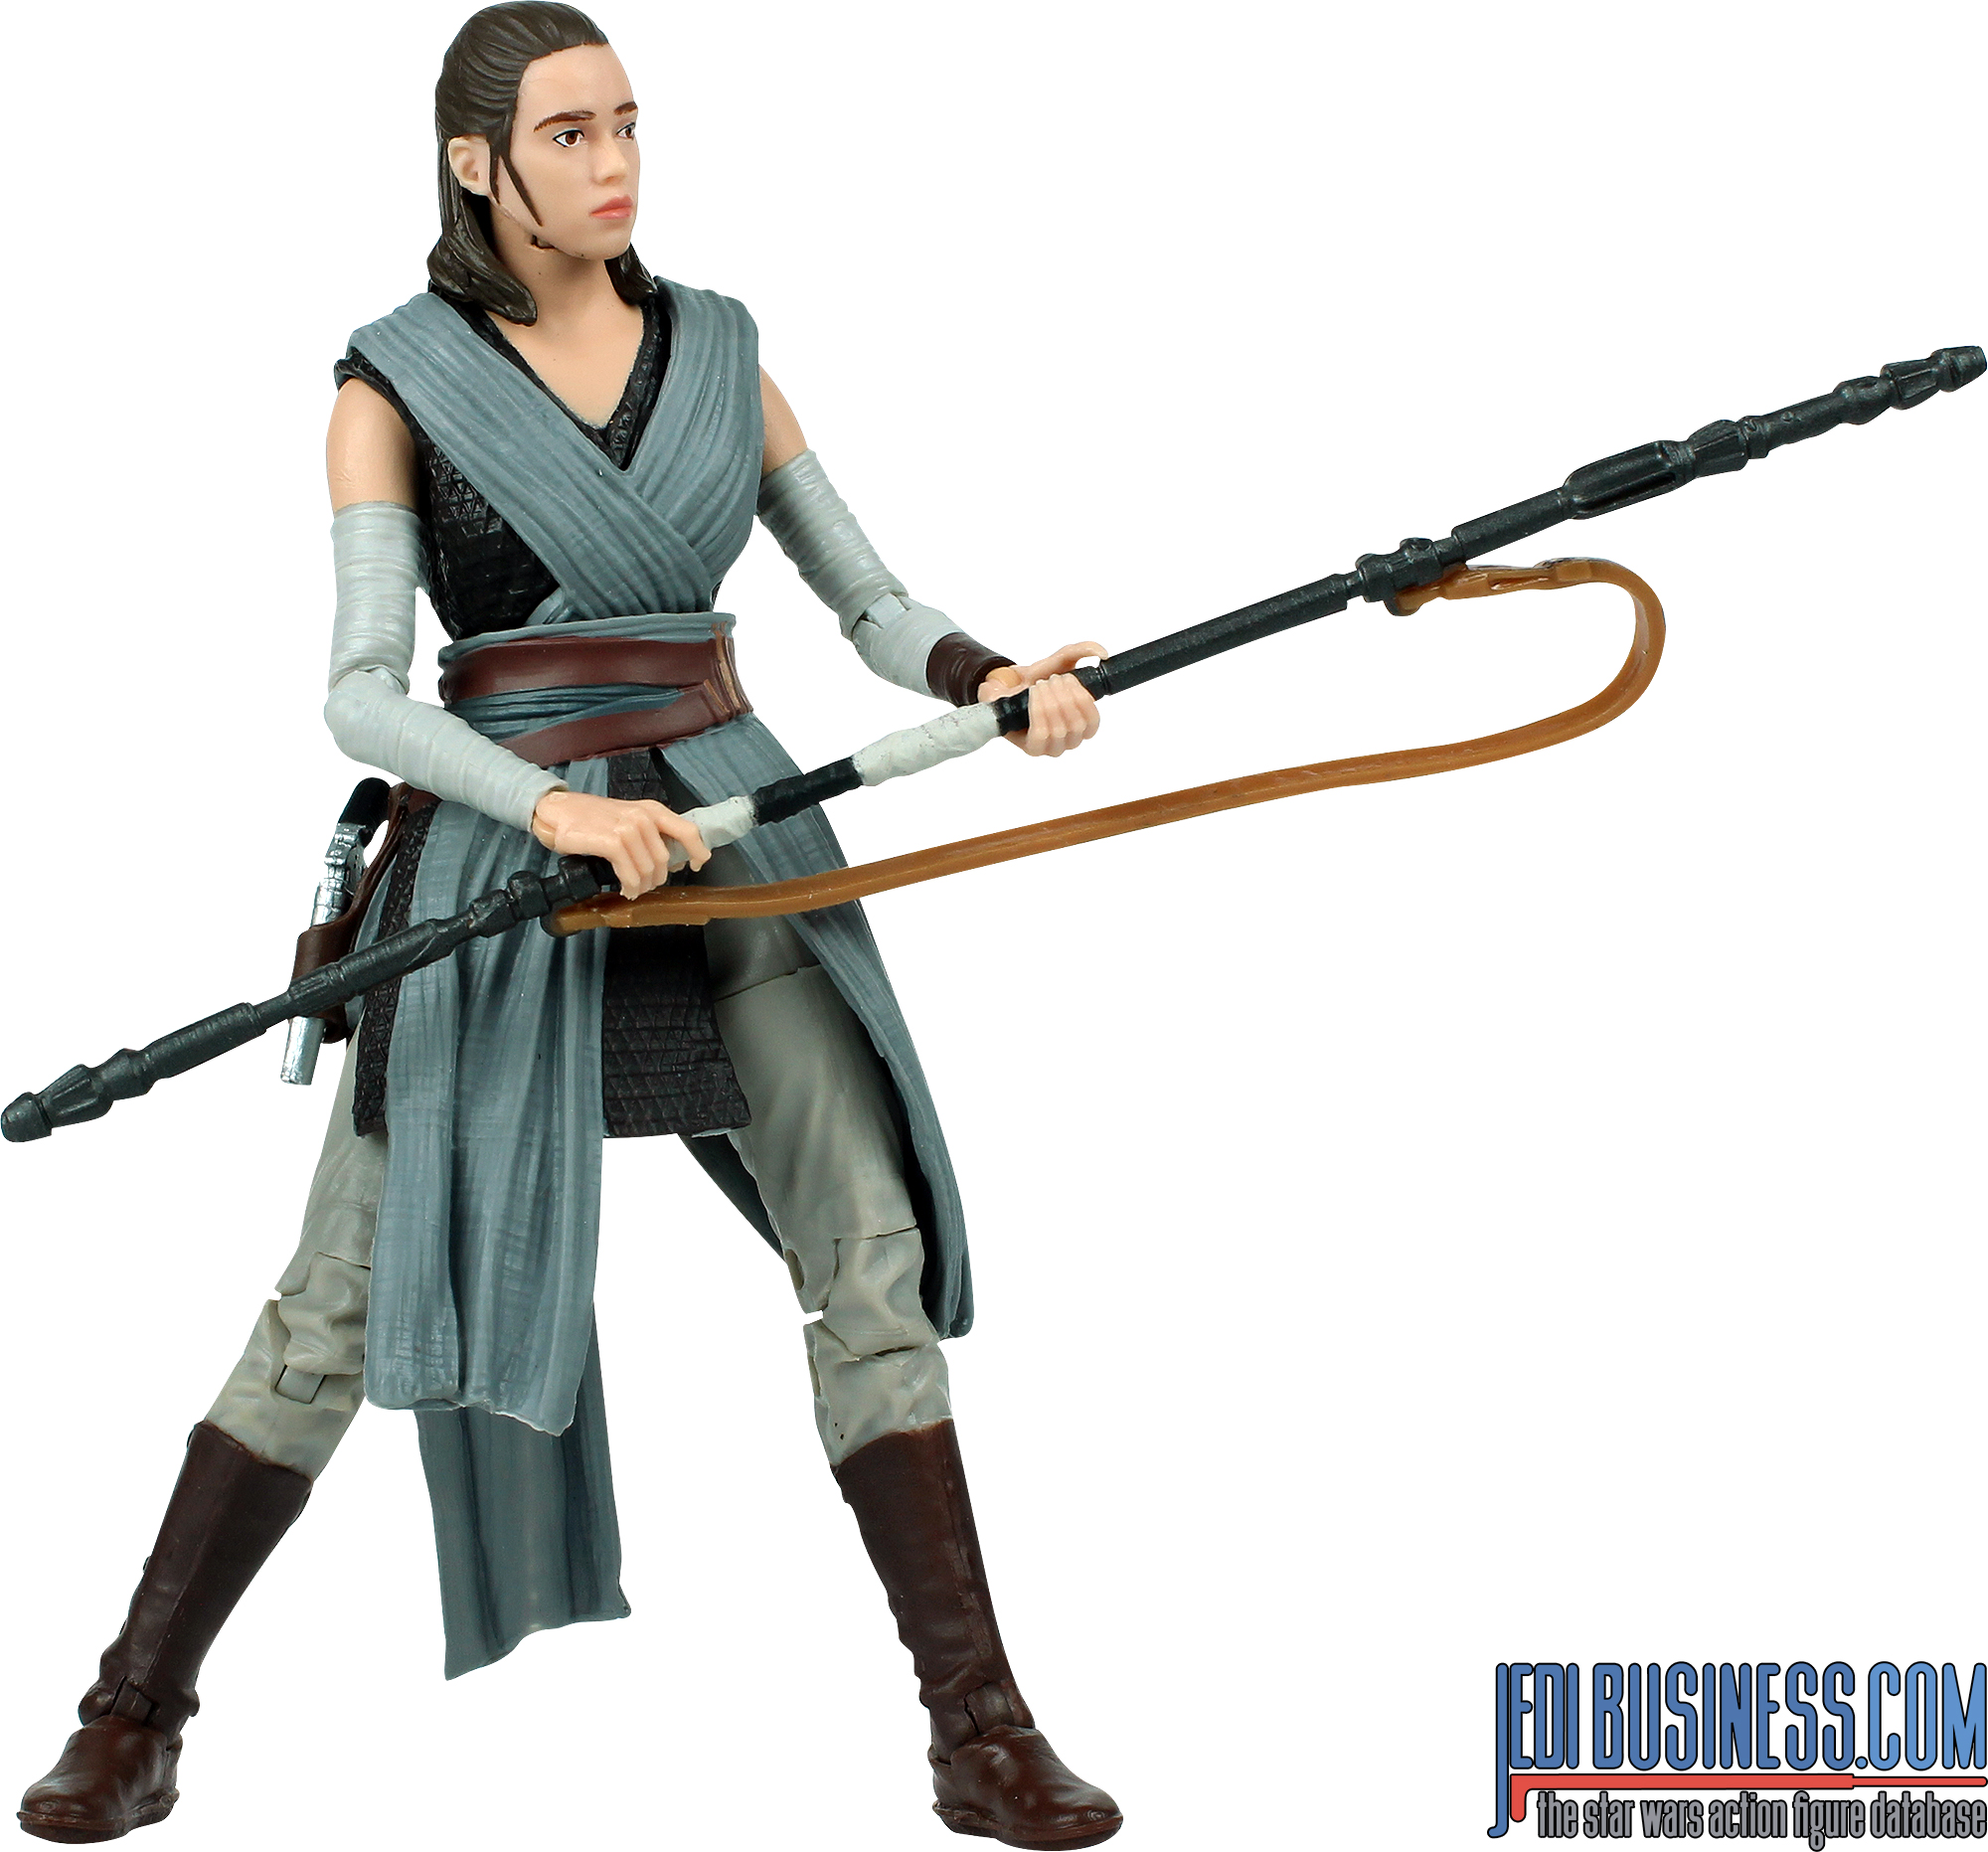 Rey SDCC 2-Pack With Luke